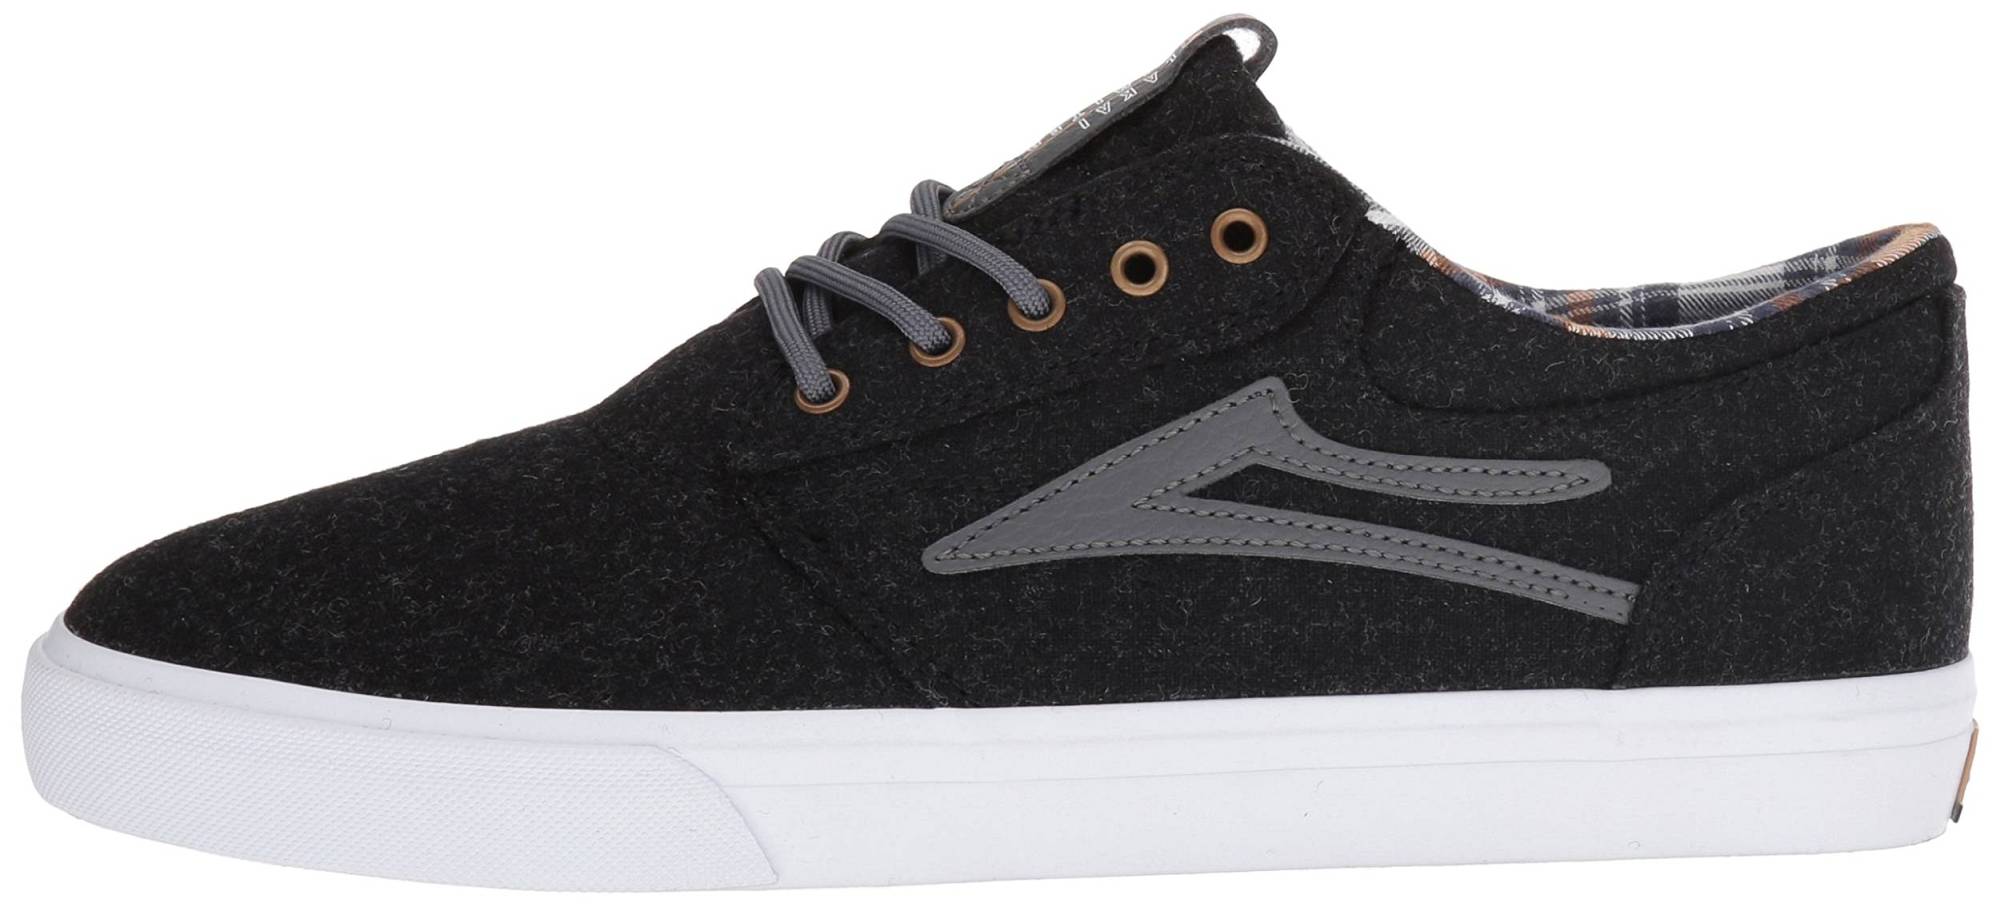 Lakai Griffin – Shoes Reviews & Reasons To Buy